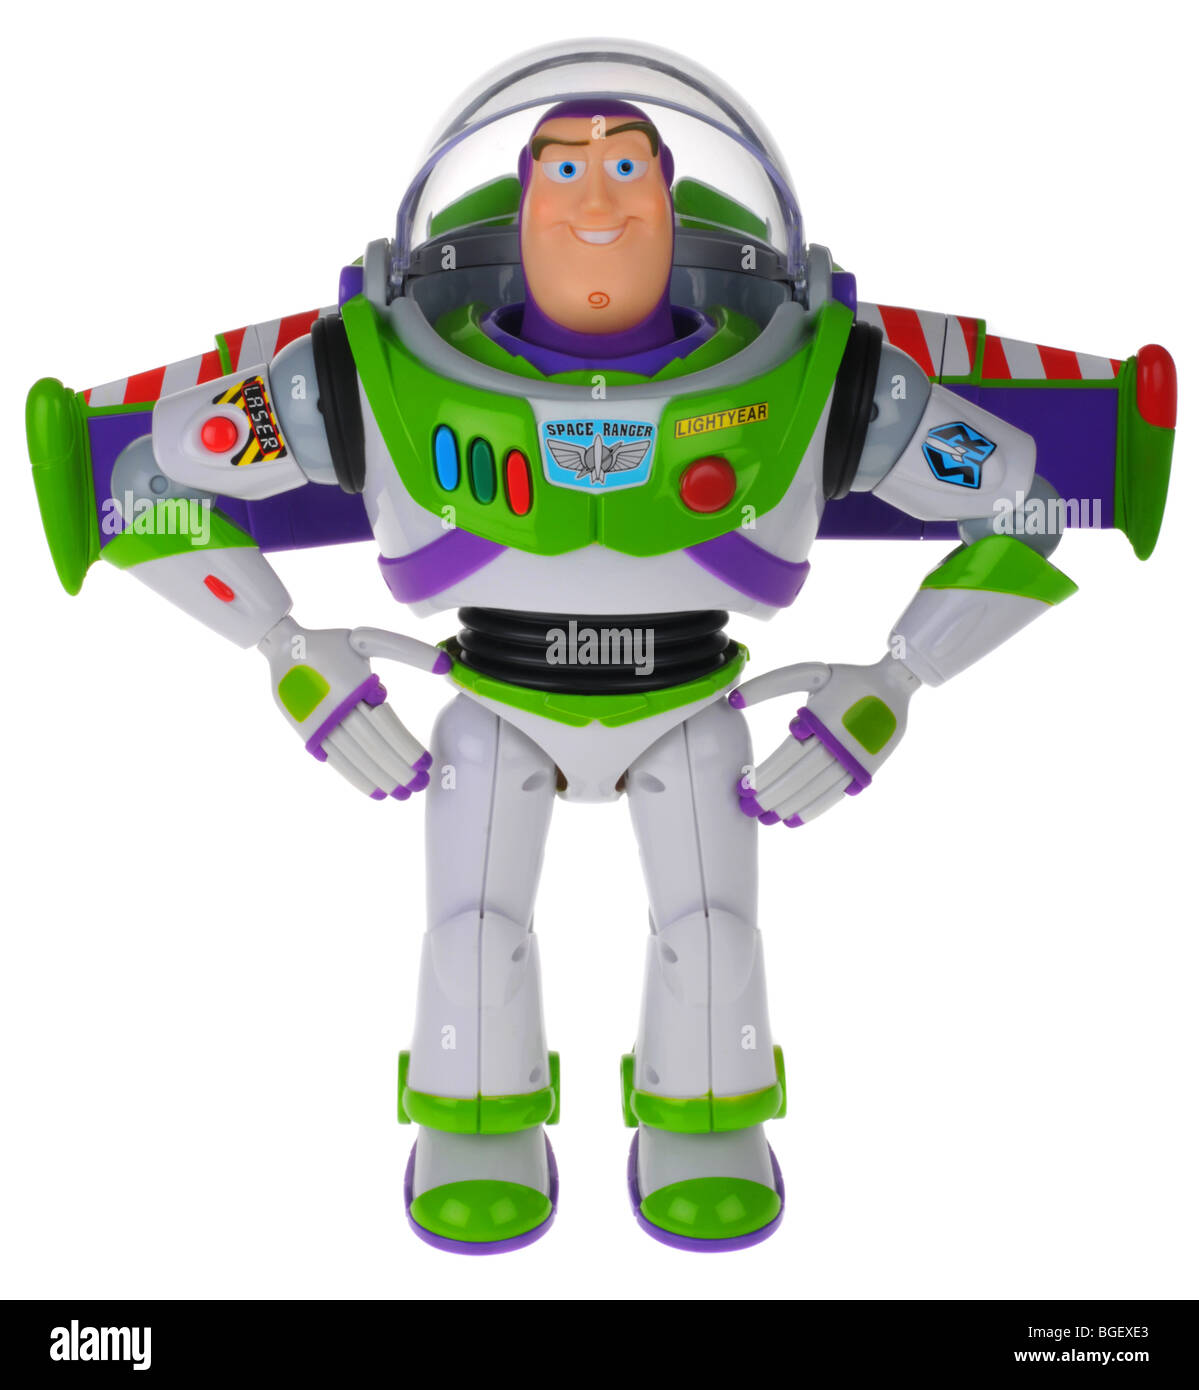 Buzz Lightyear from the film "Toy Story" Stock Photo